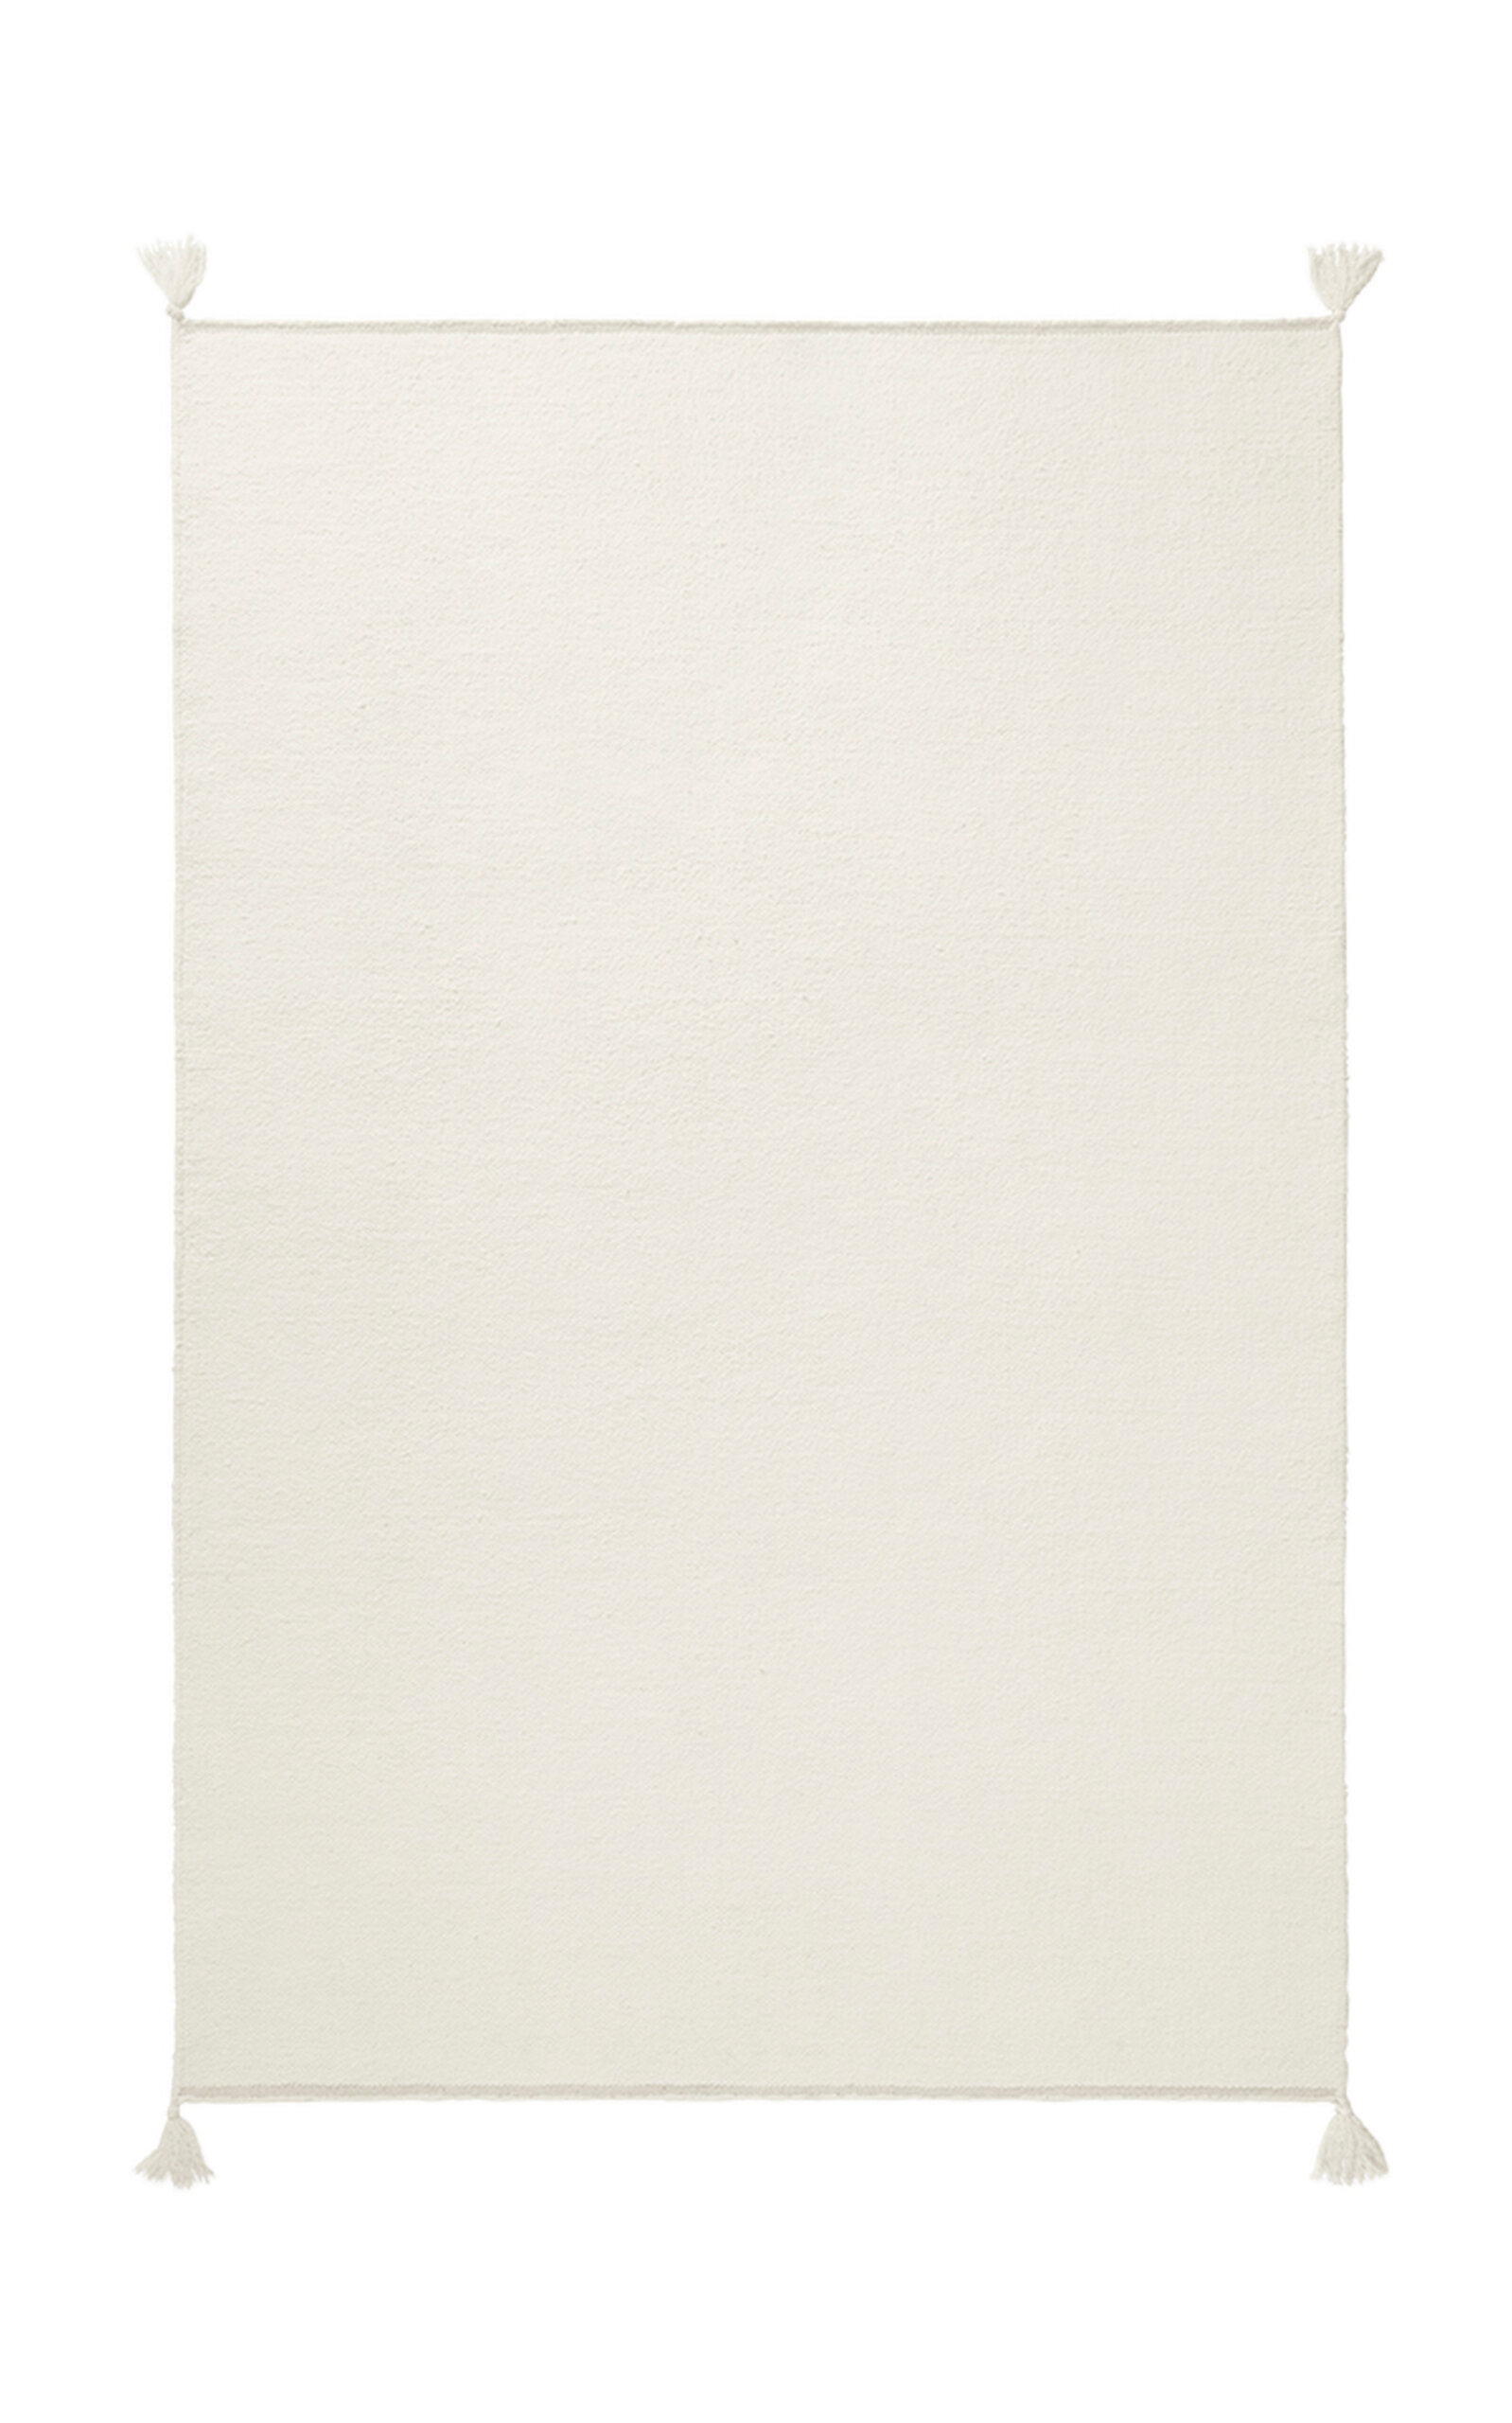 Nordic Knots Merino By ; Flatweave Area Rug In Natural White; Size 5' X 8' In Off-white